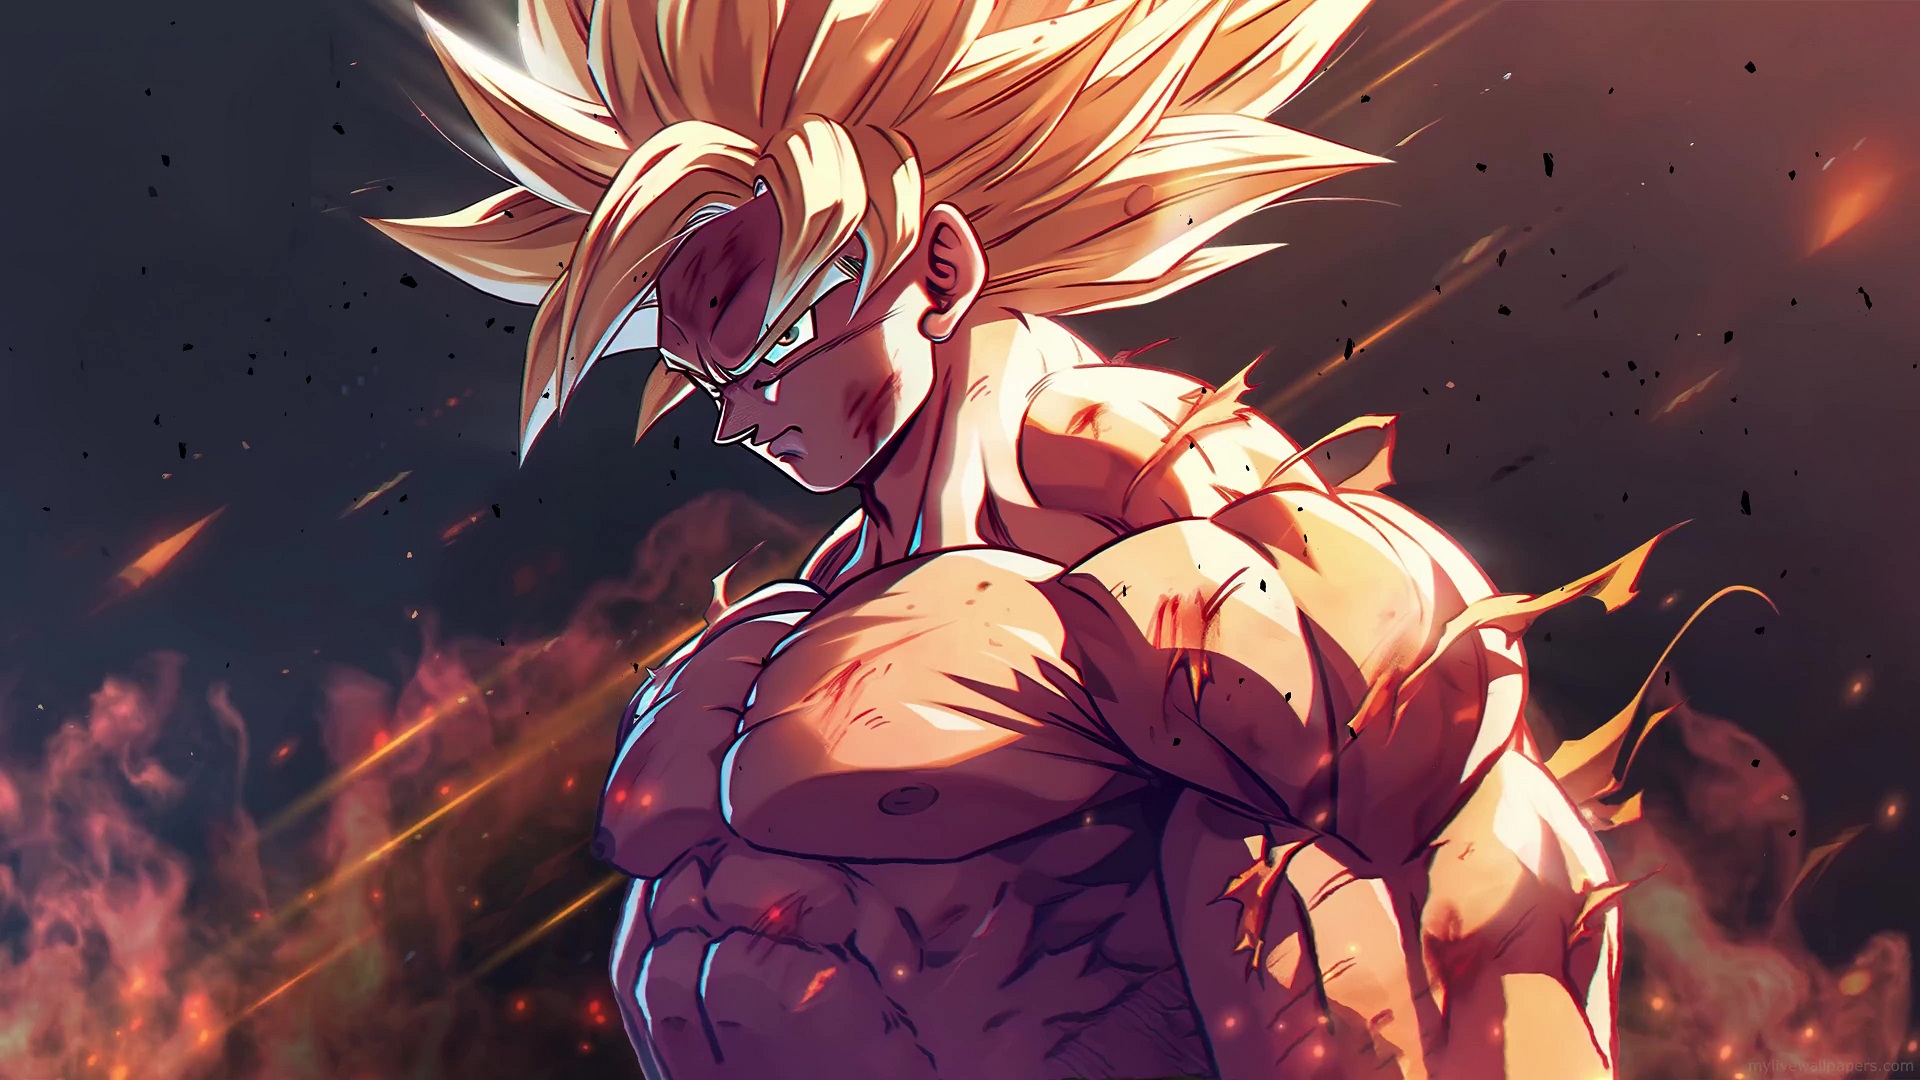 Dragon Ball Live Wallpaper 3 Free Android Live Wallpaper download -  Download the Free Dragon Ball Live Wallpaper 3 Live Wallpaper to your  Android phone or tablet